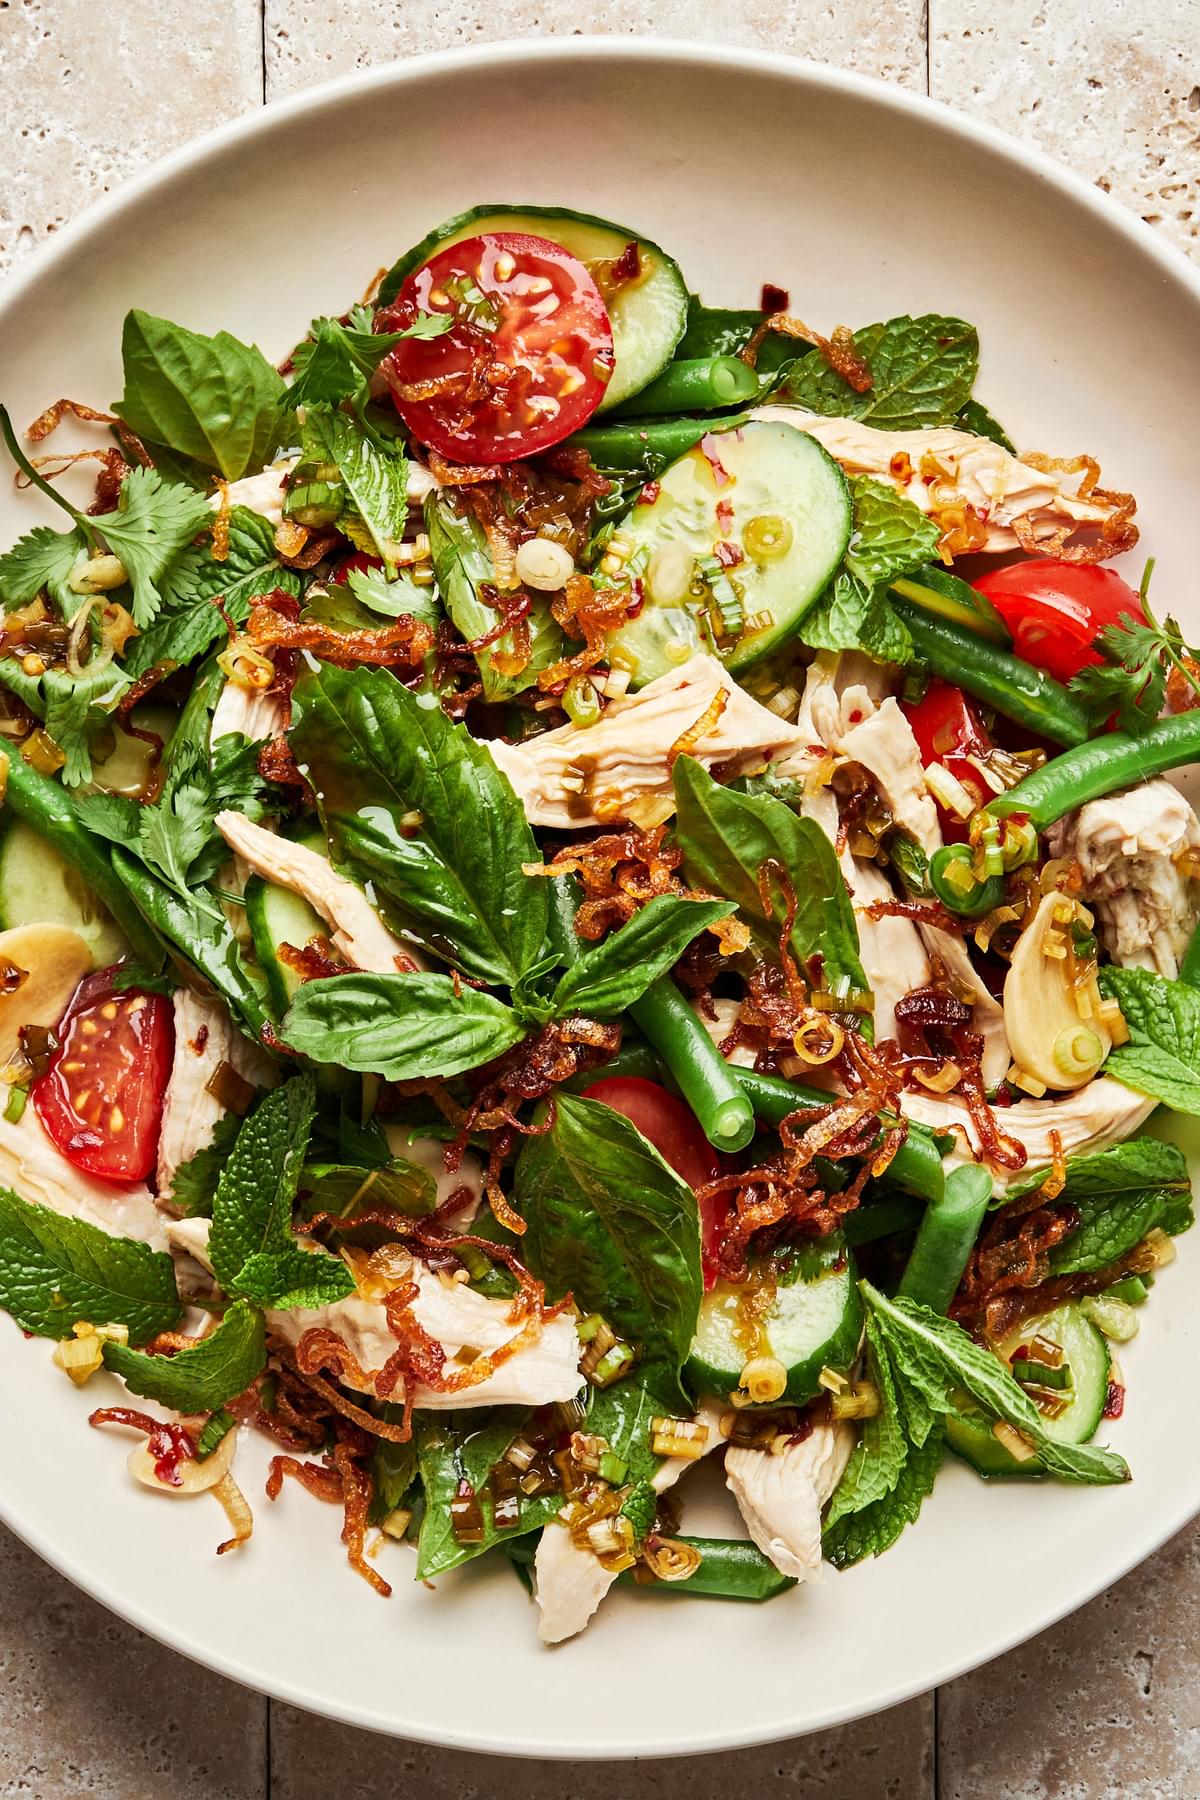 lemongrass chicken herb salad made with basil, mint, green beans, tomatoes, cucumbers and fried shallots